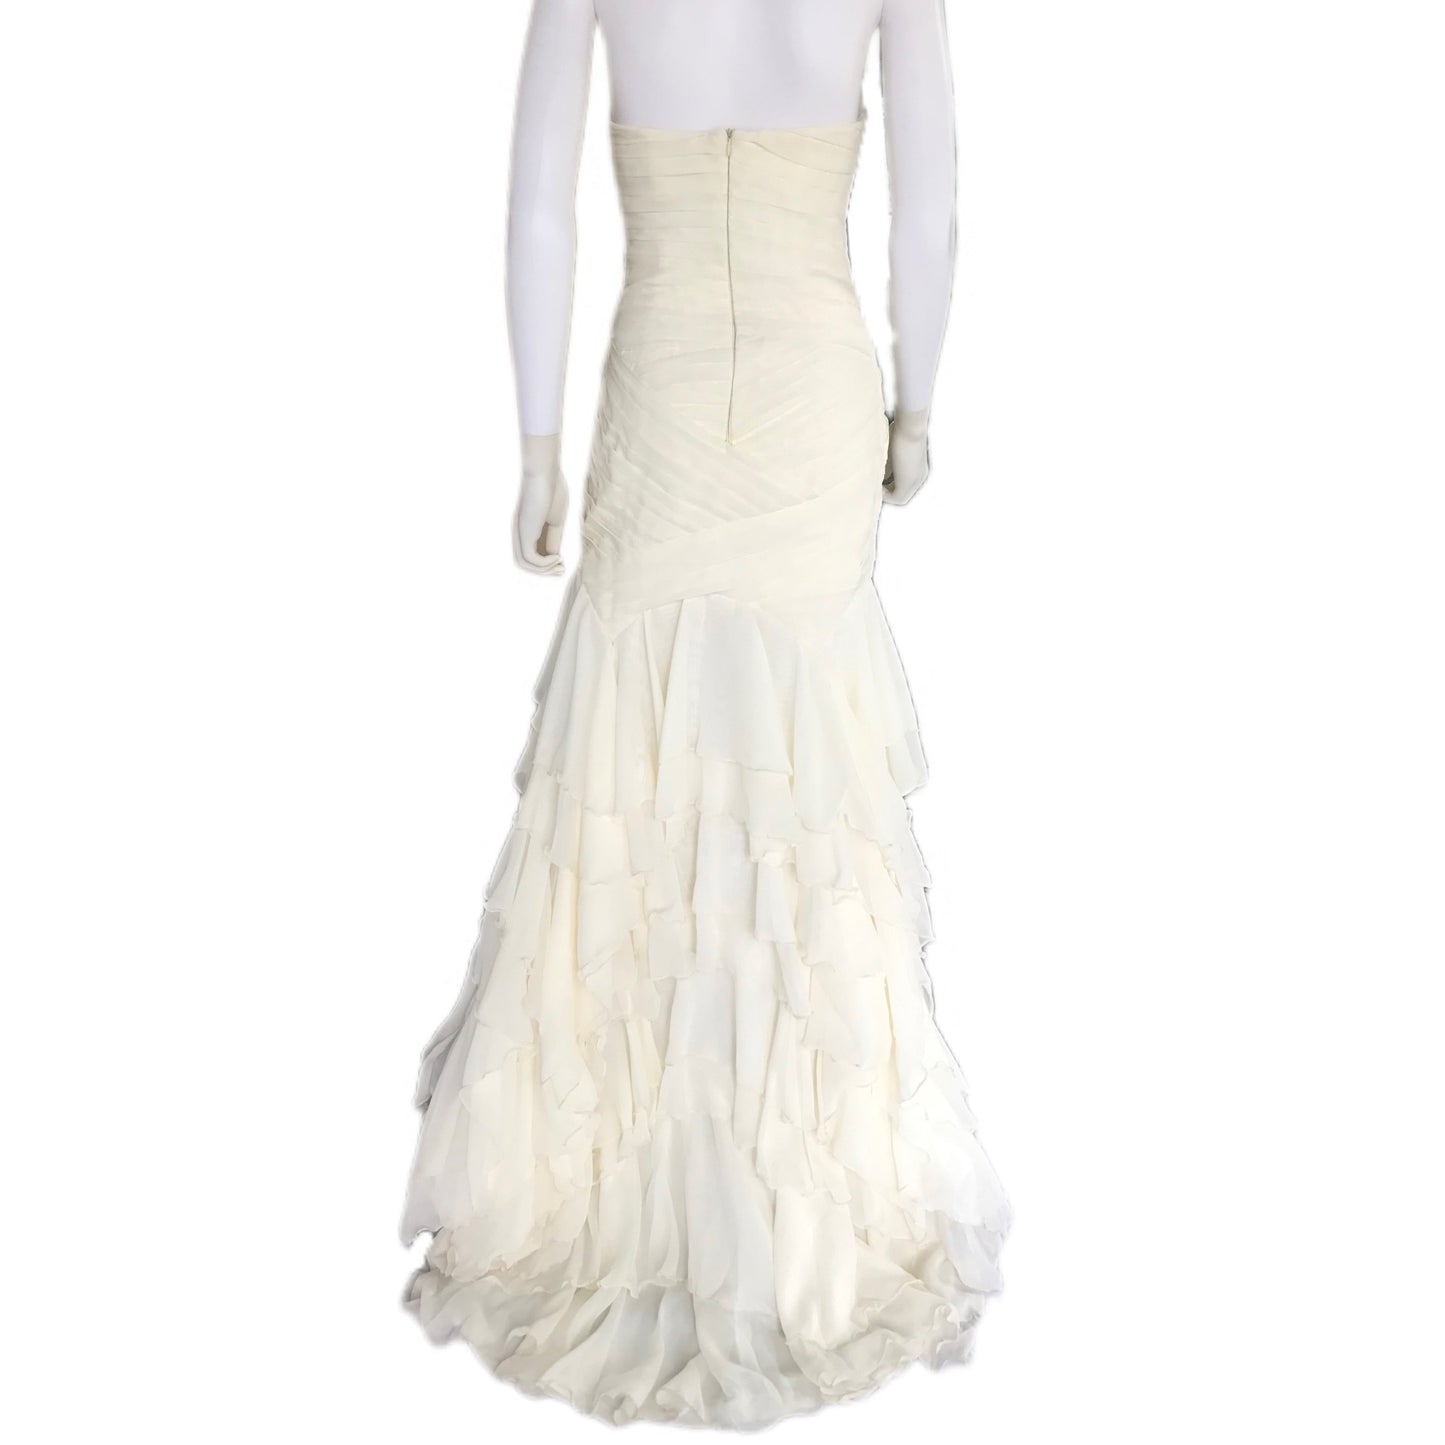 The Madonna Lily Women's Chiffon Wedding Dress - Made to Measure - Ivory or White